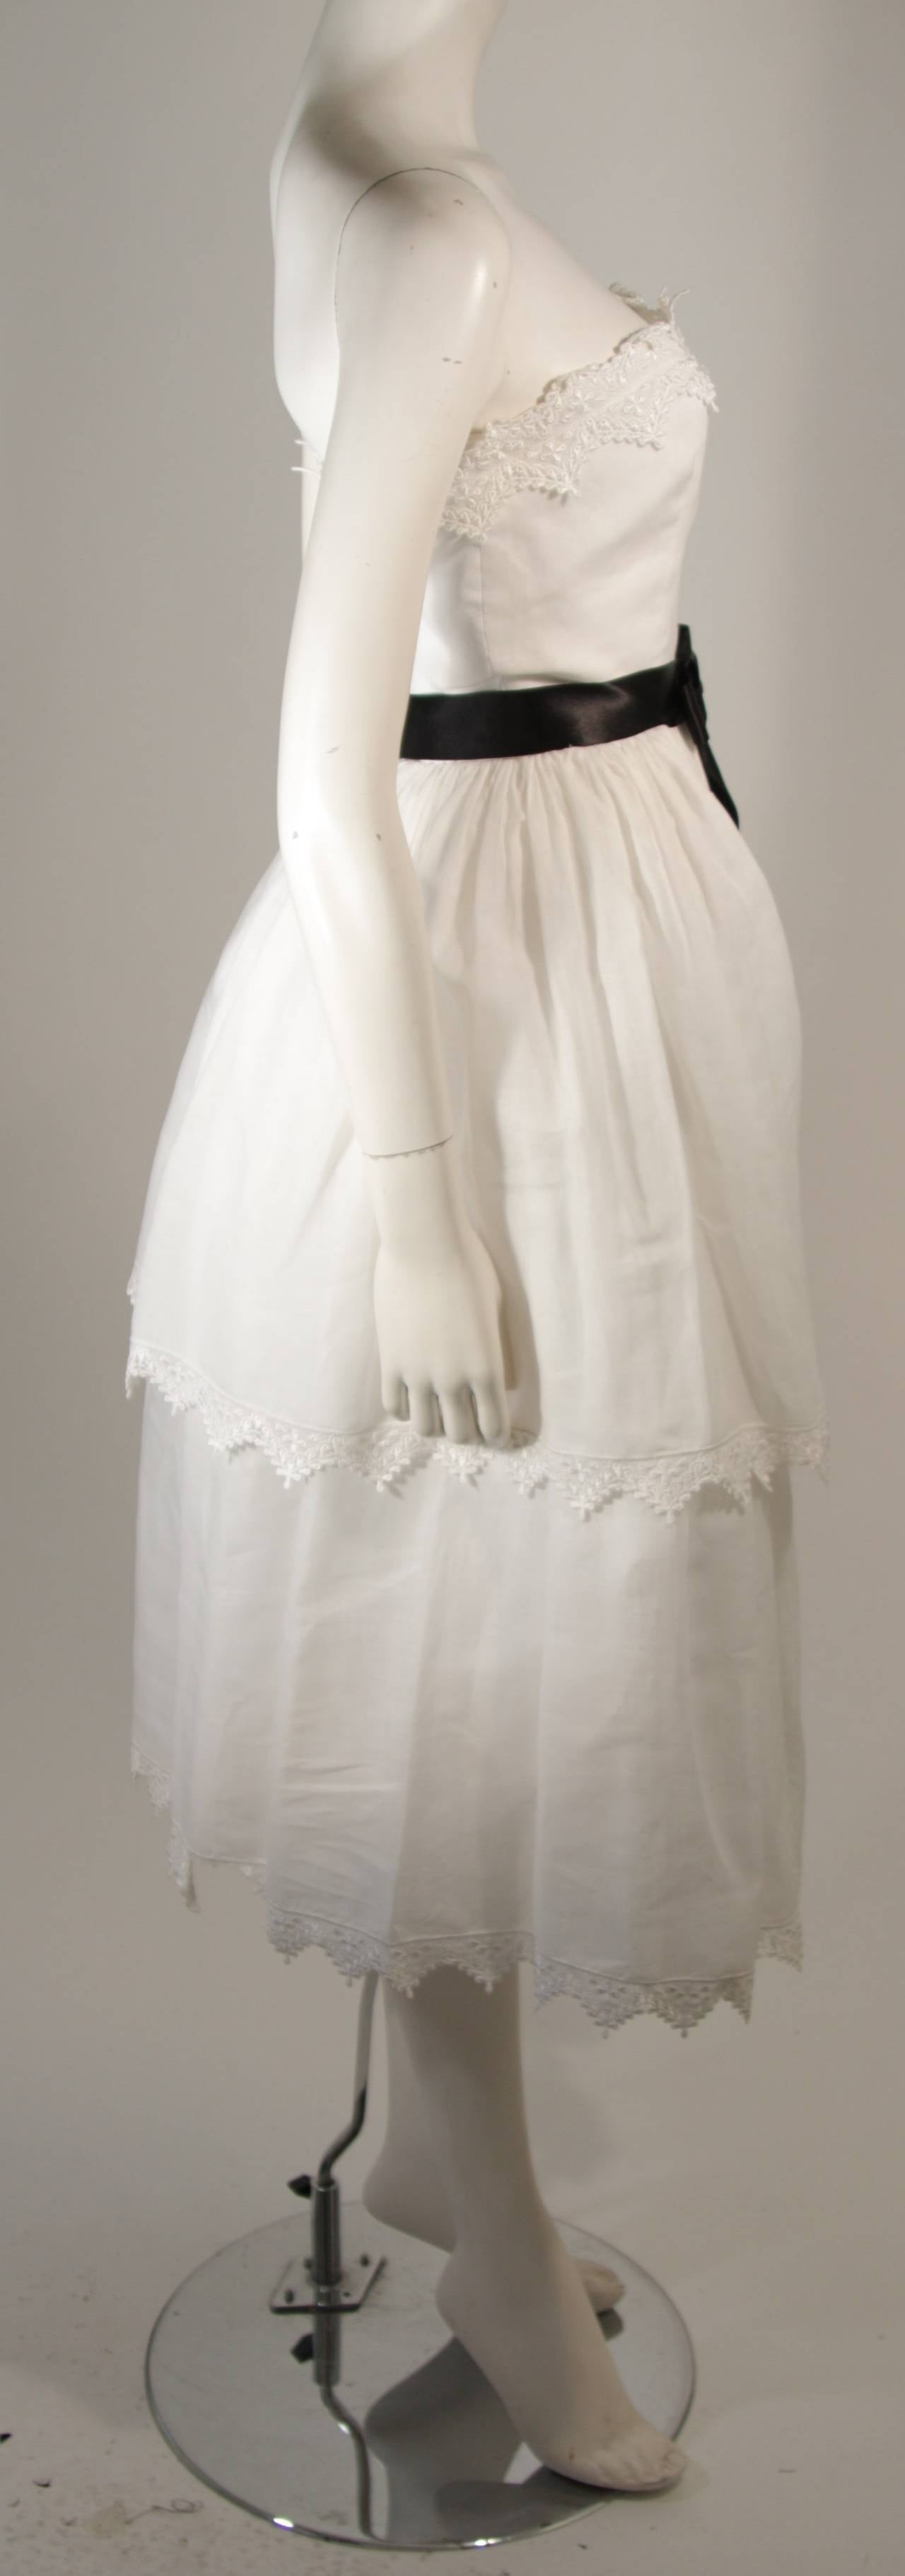 Women's Albert Capraro White Cotton Tiered Dress with Scalloped Lace Edges Size 6 For Sale